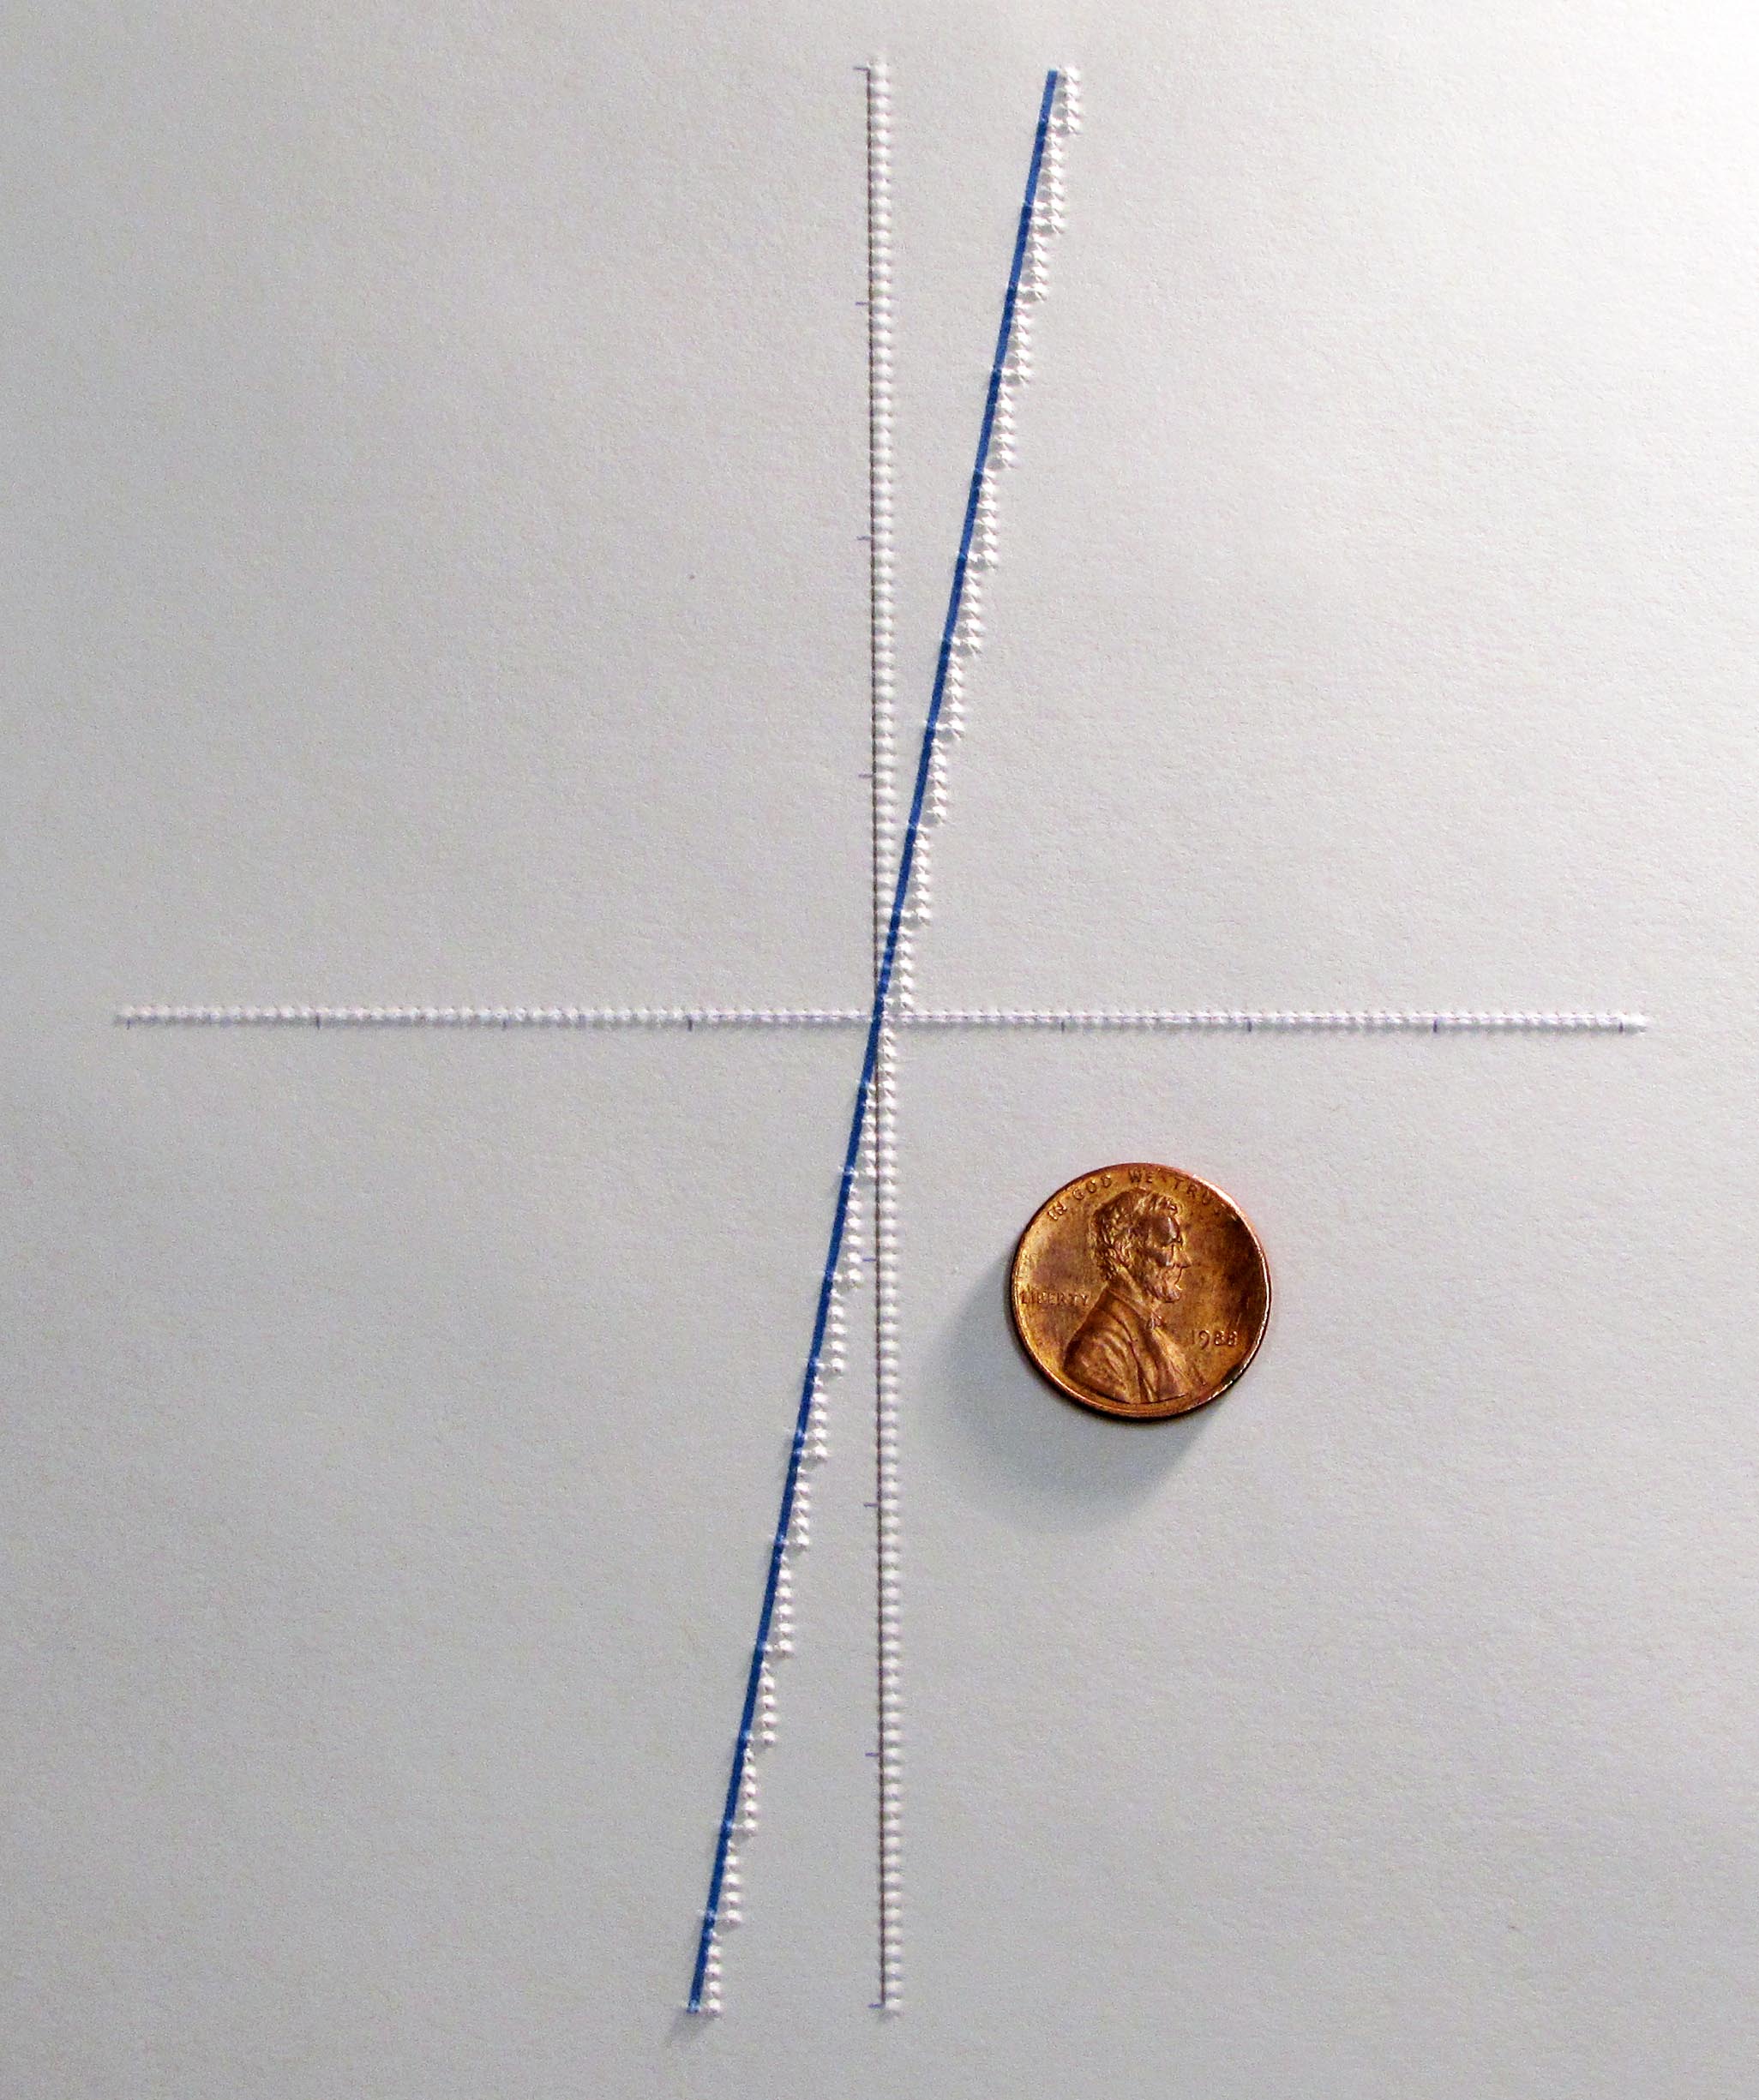 Photograph of a embossed tactile graphic, generated by the ViewPlus SpotDot printer.  Raised dots are evident, depicting the X and Y axis and a data line (overprinted in blue), traversing from the lower left to the upper right. A penny is shown for size comparison. 